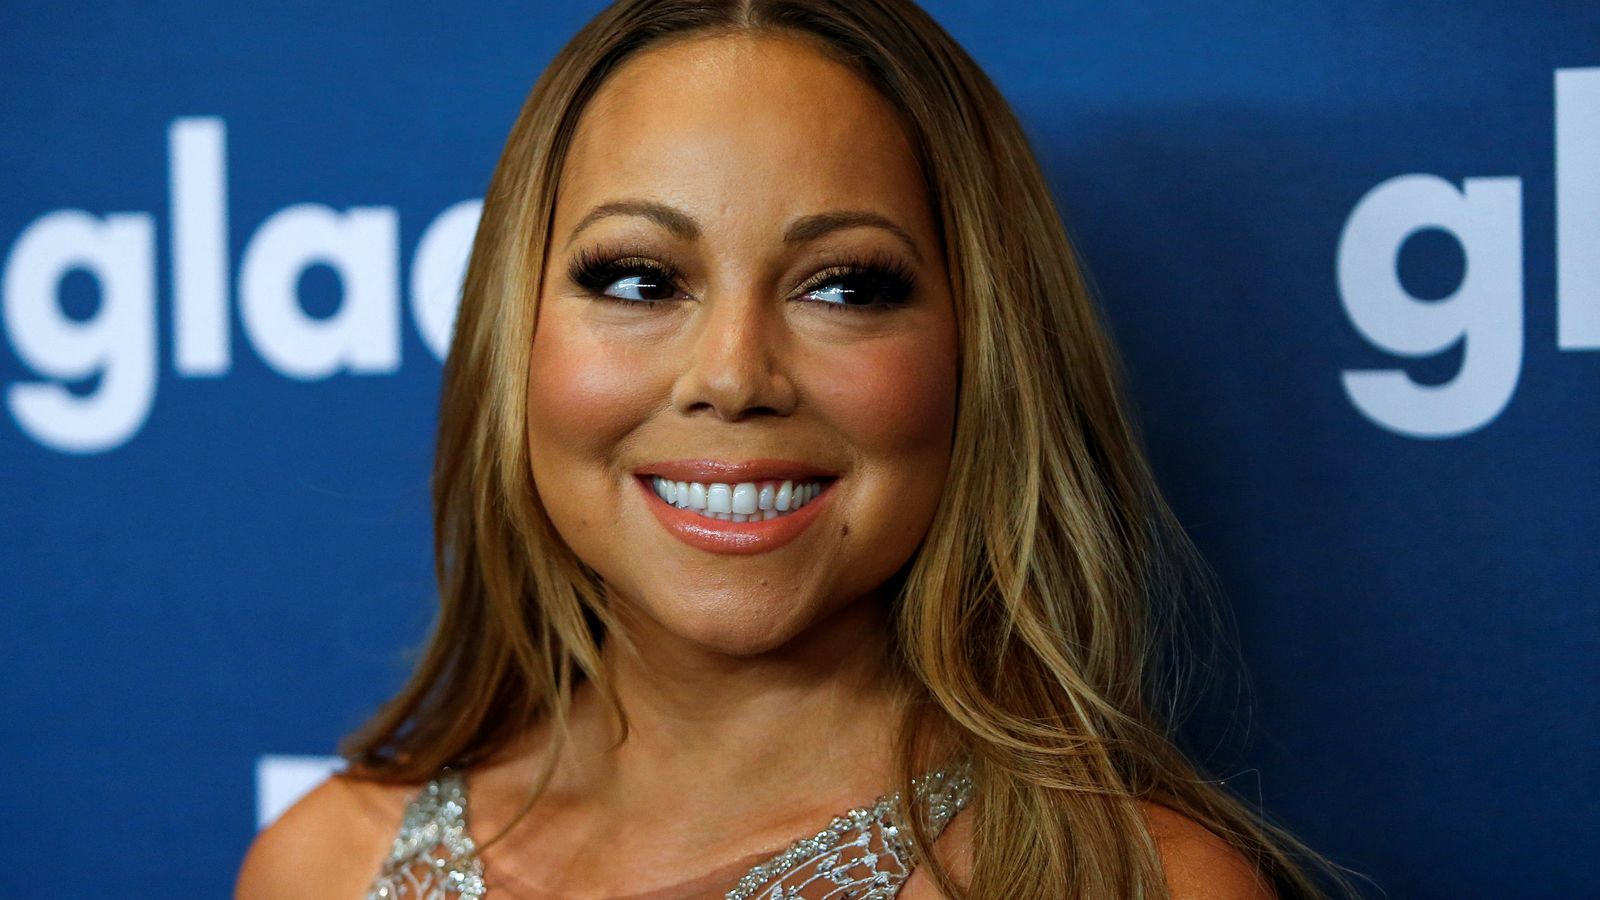 Foto: Singer carey attends the 27th annual glaad media awards in new york